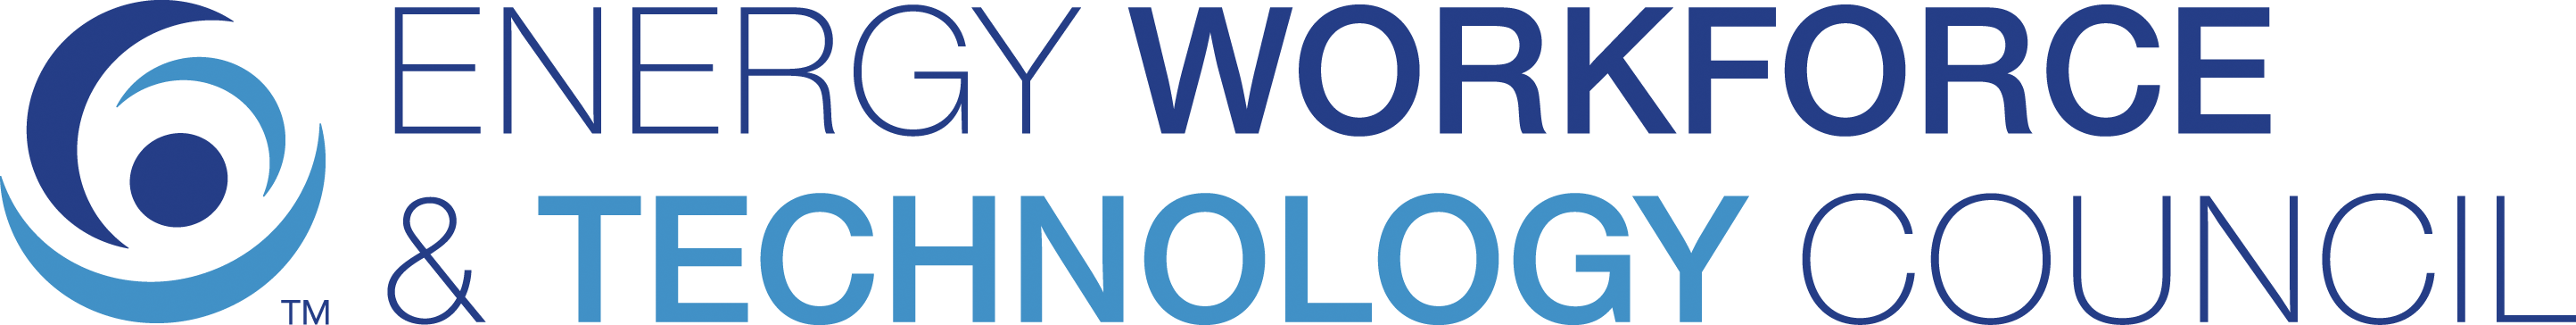 Energy Workforce And Technology Council Logo 1